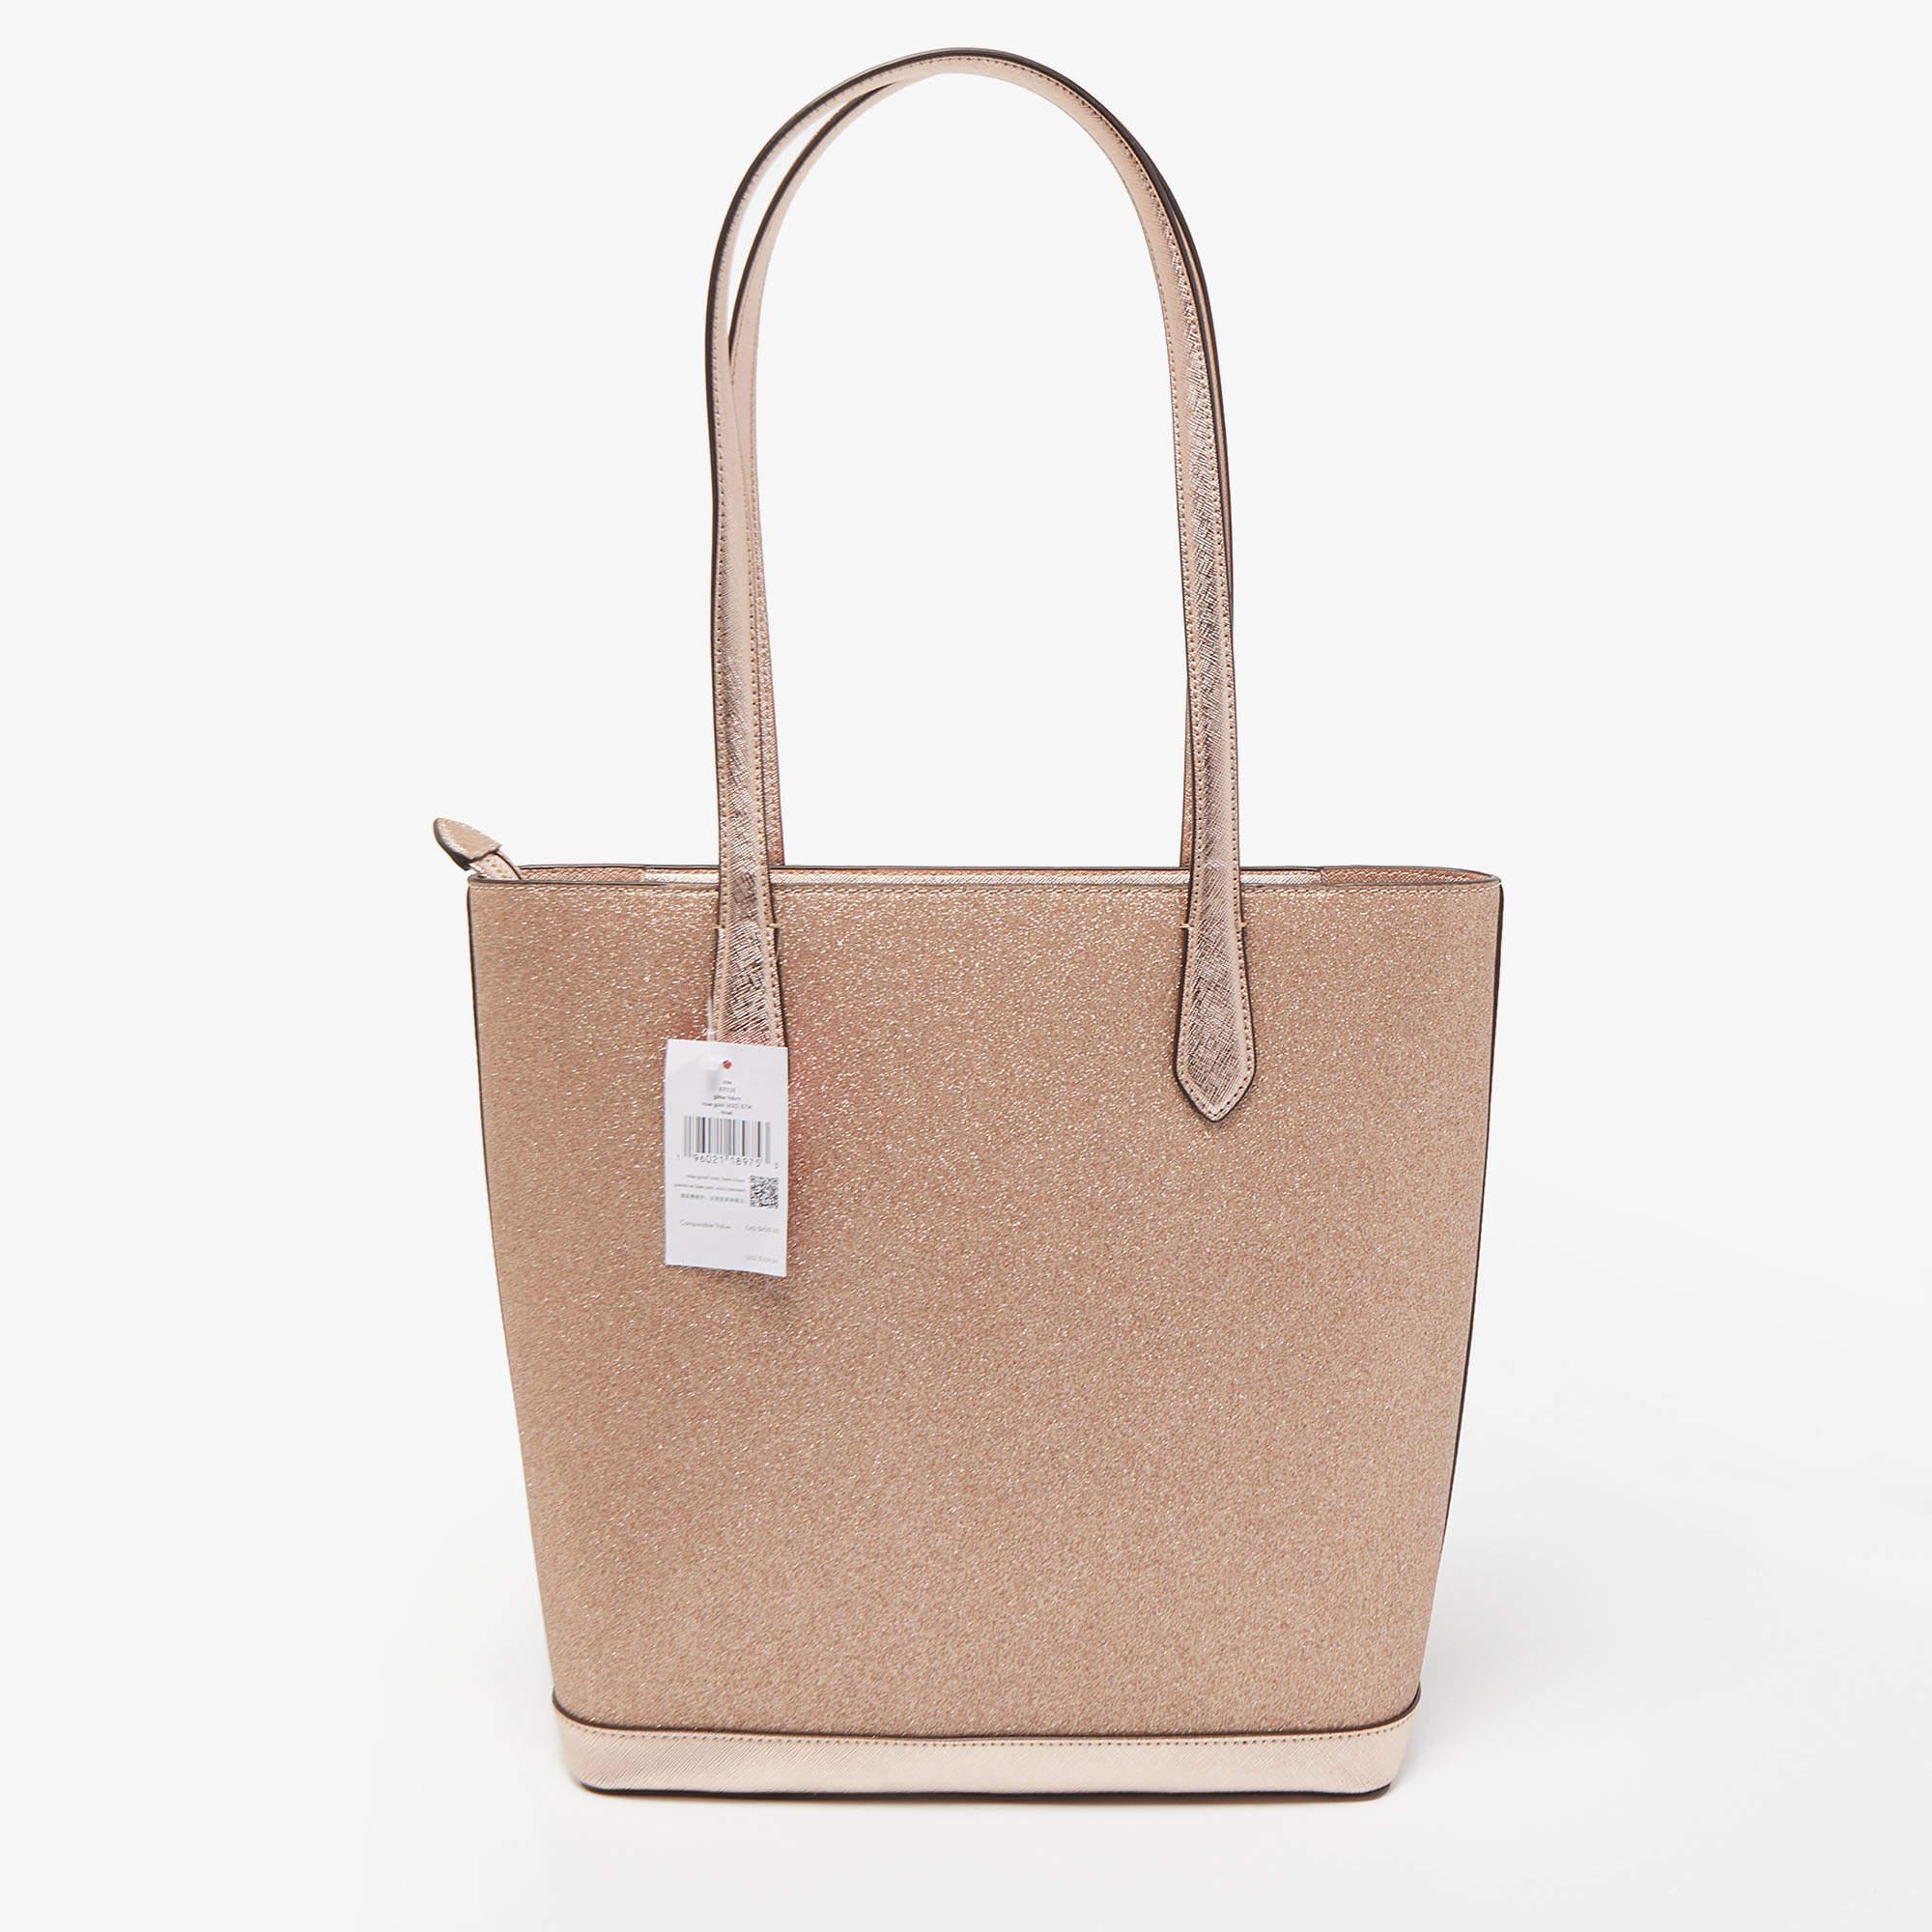 Created from high-quality materials, this tote is enriched with functional and classic elements. It can be carried around conveniently, and its interior is perfectly sized to keep your belongings with ease.

Includes: Brand Tag